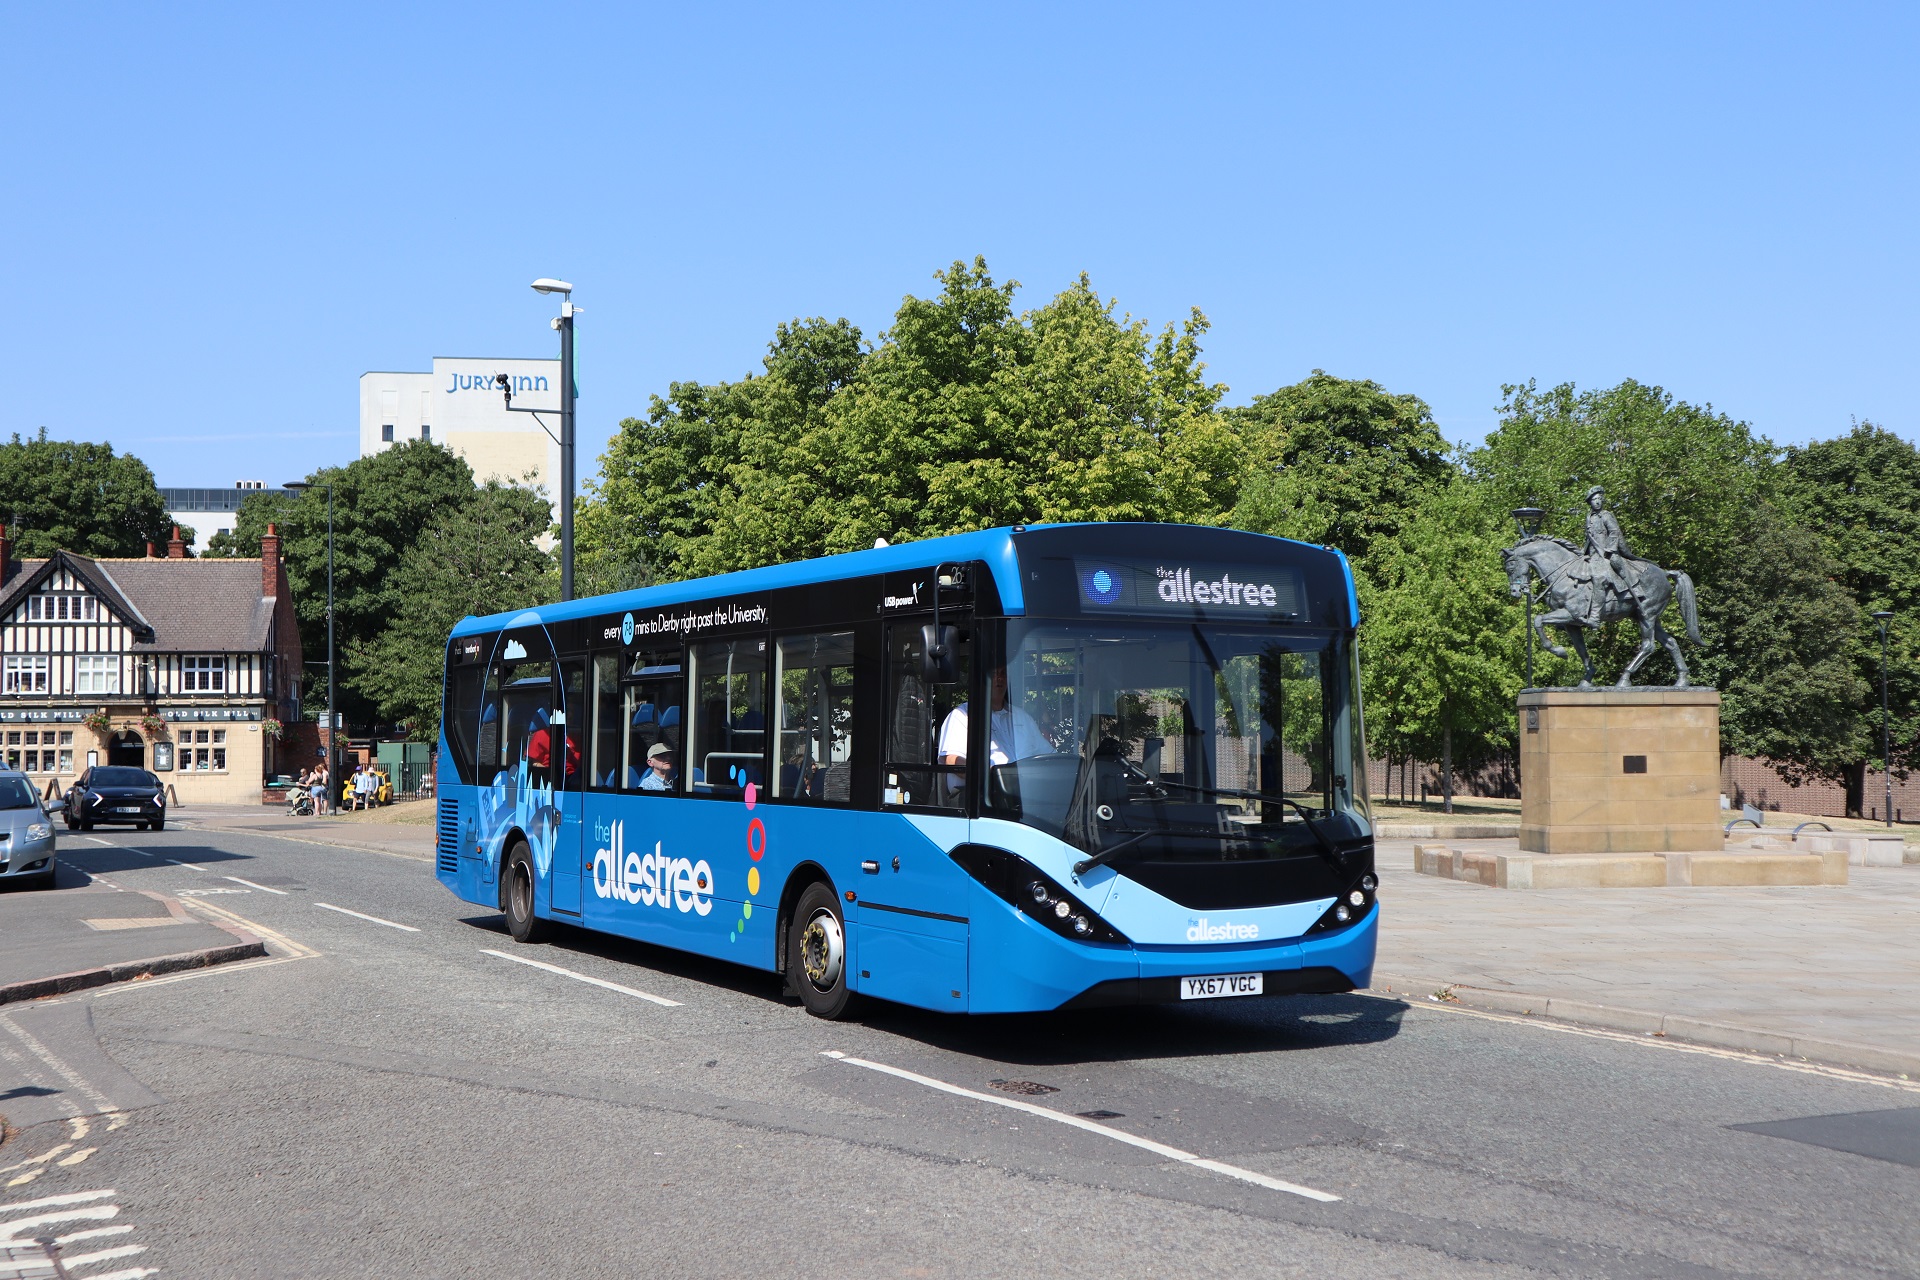 Bus revenue support and Bus Fare Cap Grant in England extended to June 2023